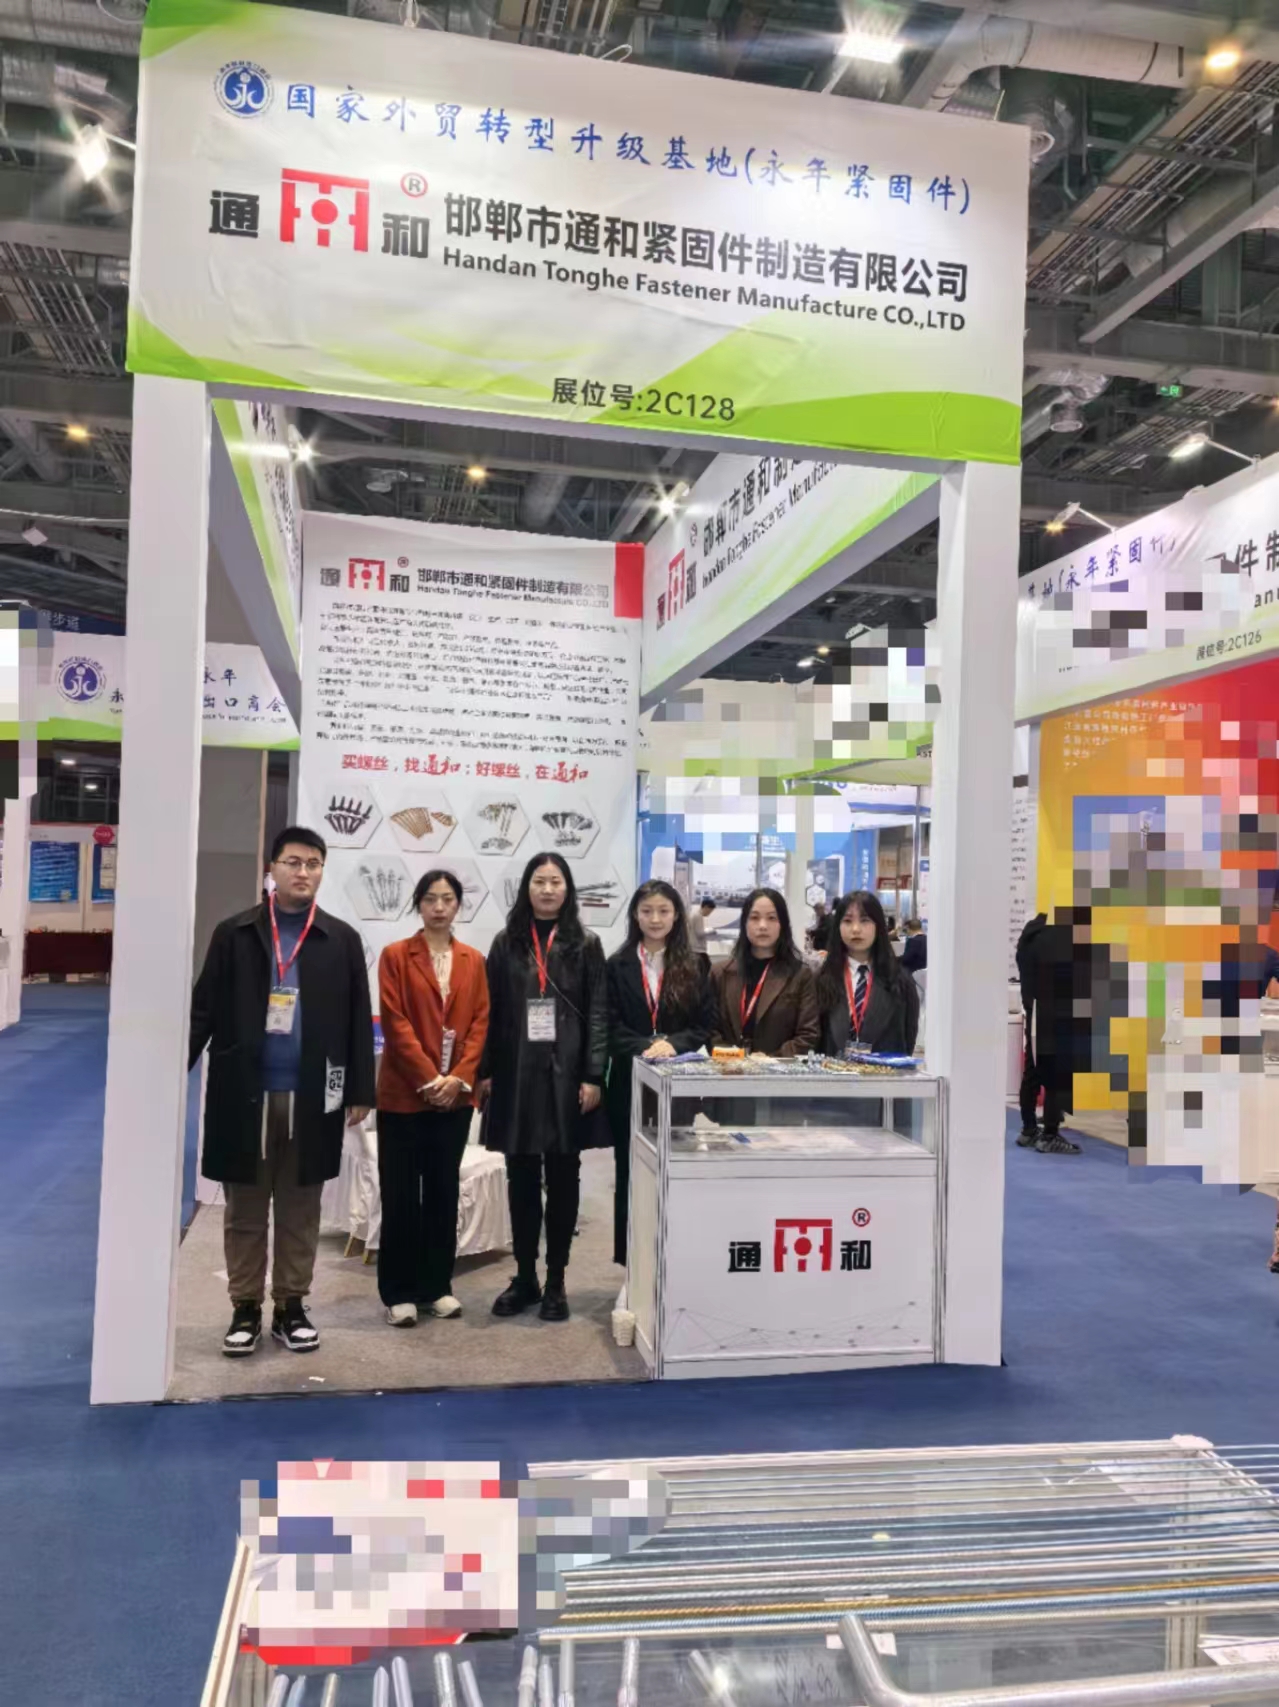 Exhibition End: Tonghe Fastener Manufacturing Co., Ltd. Exhibition Review